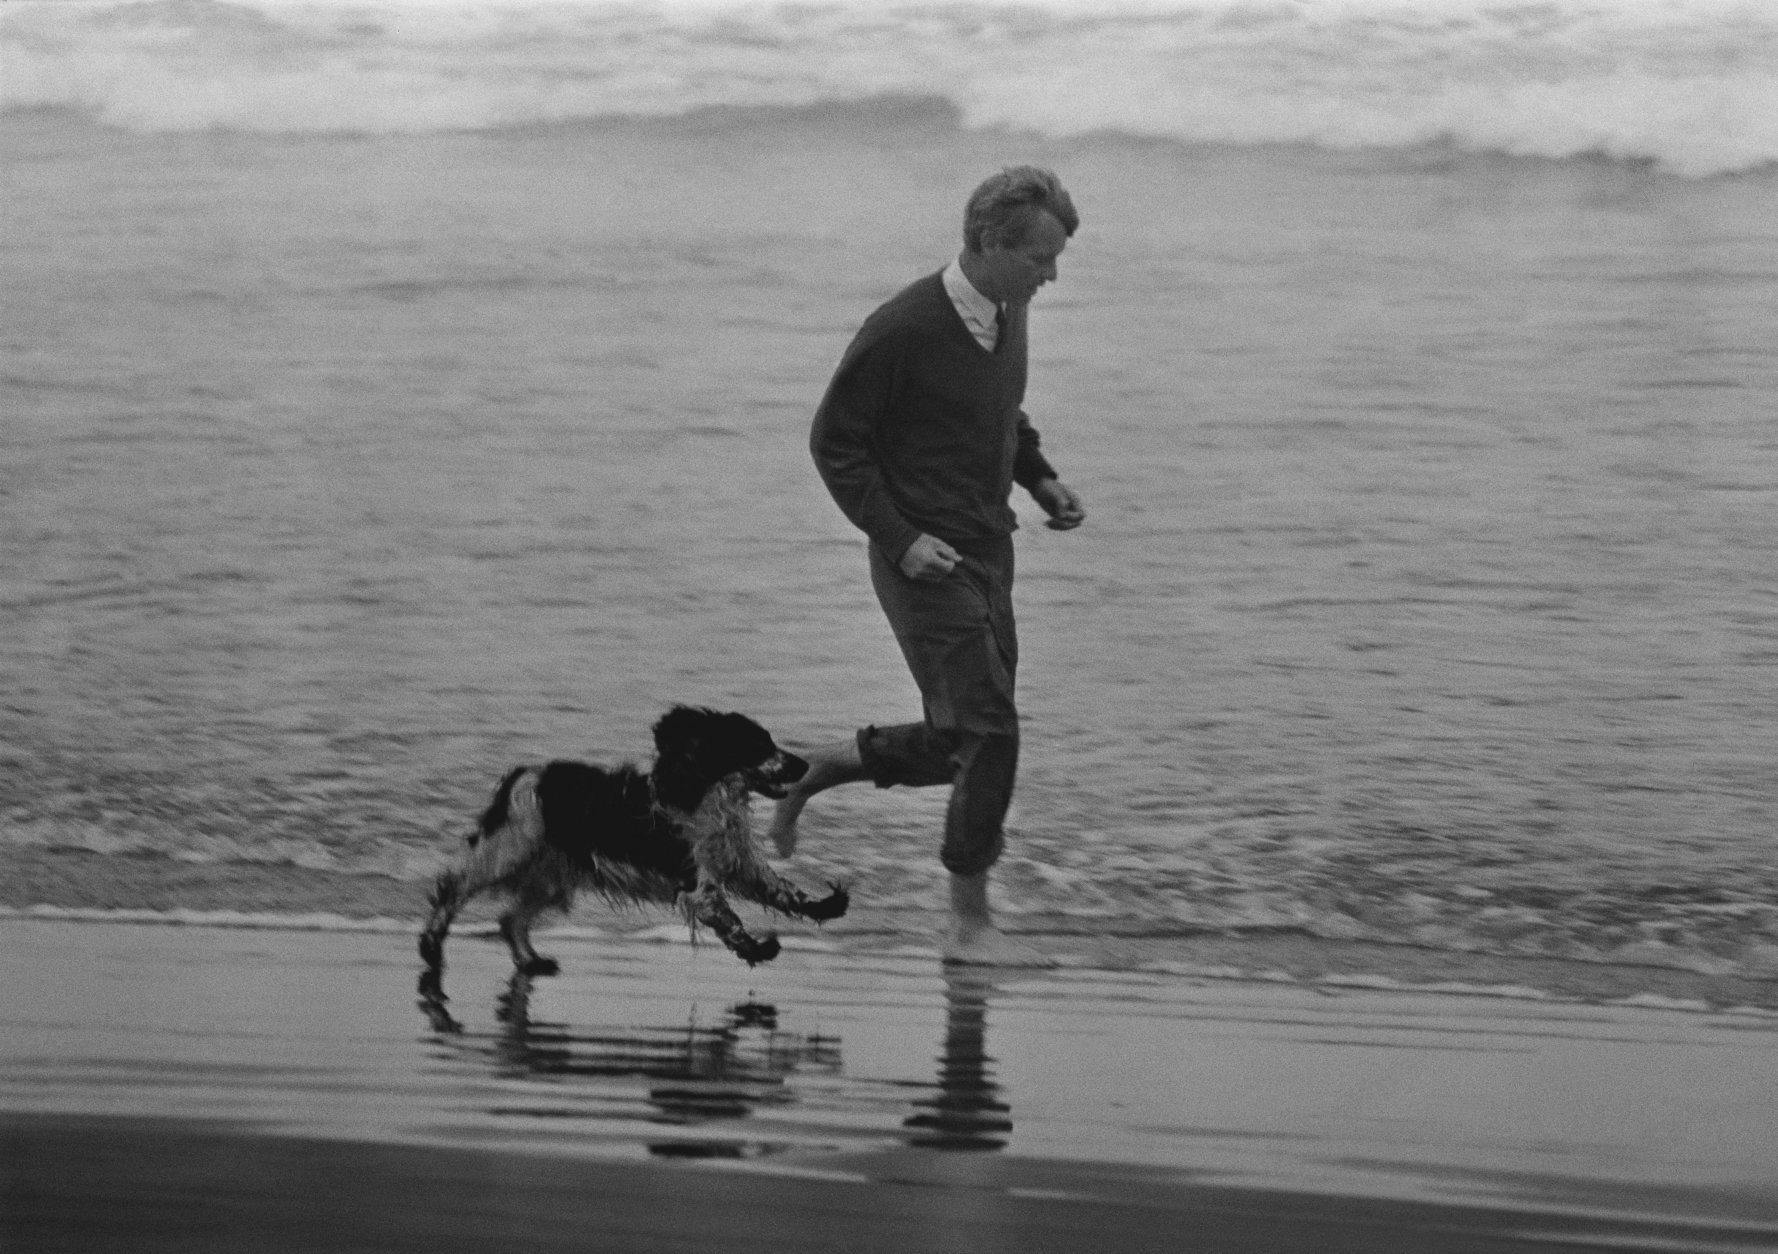 Democratic Sen. Robert F. Kennedy of New York runs through the surf with his dog, Freckles, during a stop in Astoria, Ore., May 24, 1968, during his  campaign for the presidential nomination.   Kennedy  was shot and killed by Sirhan Sirhan shortly after a California primary election victory speech on June 5, 1968, at the Los Angeles Ambassador Hotel. Bobby Kennedy served as campaign manager for his brother John F. Kennedy's successful presidential bid, and was later appointed by President Kennedy as U.S. Attorney General. (AP Photo/Barry Sweet)